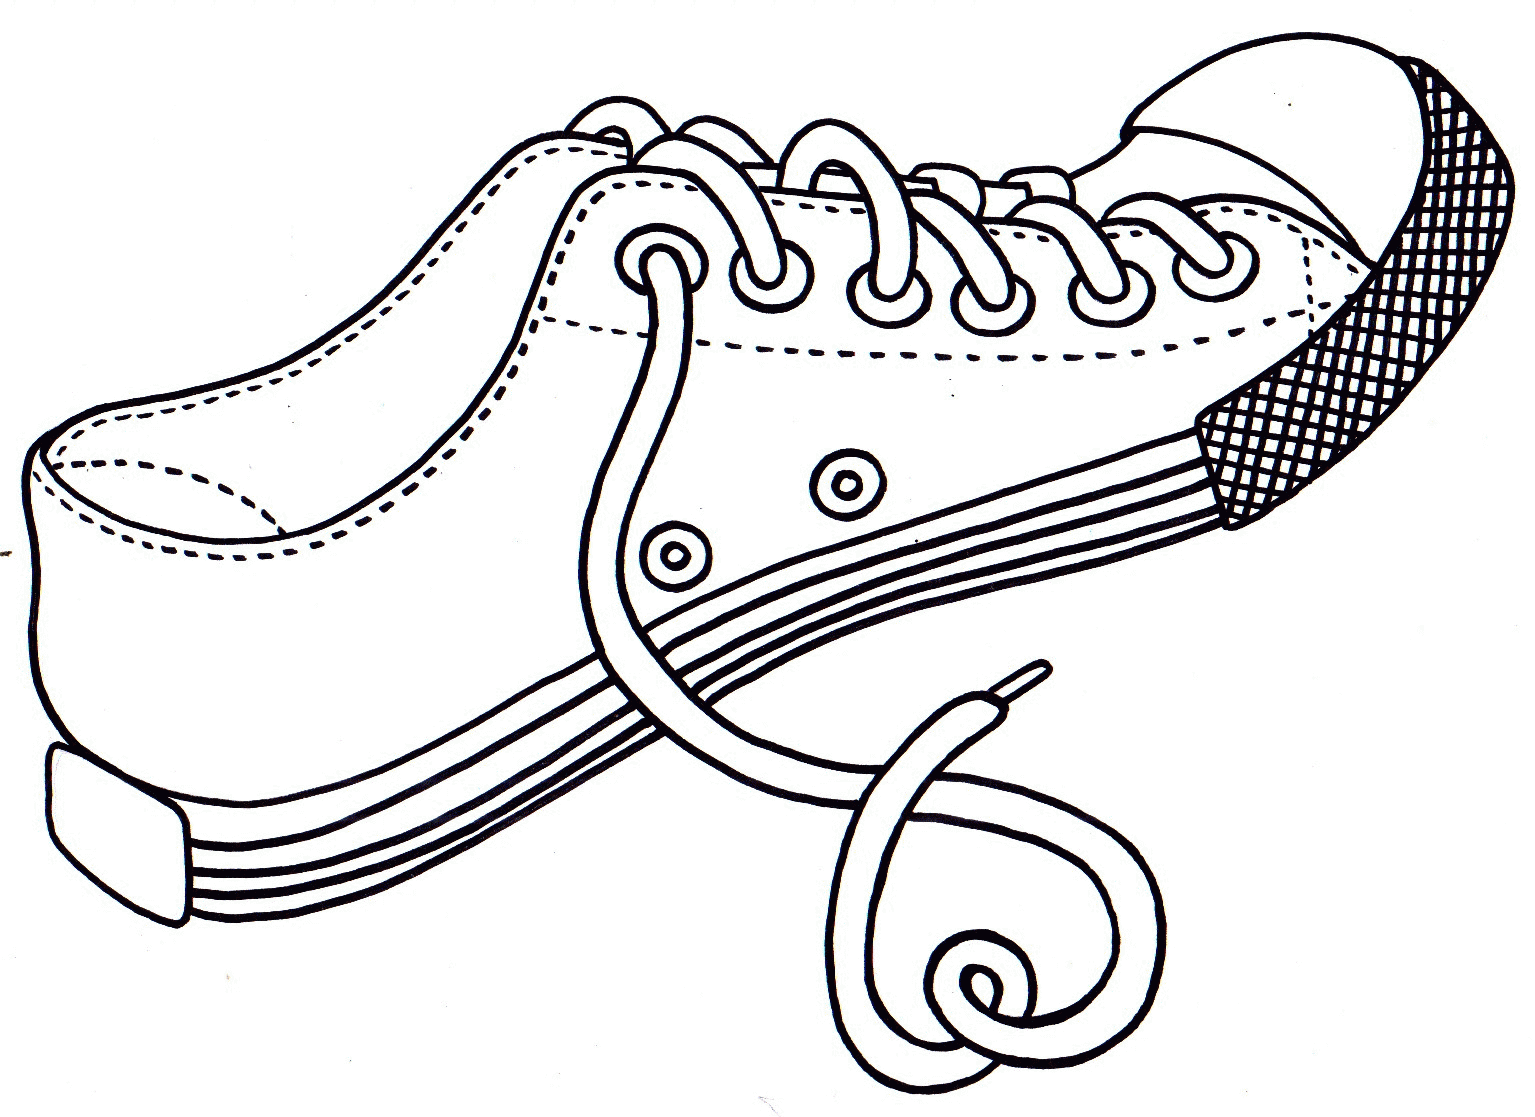 Free Coloring Page Shoes, Download Free Coloring Page Shoes png images